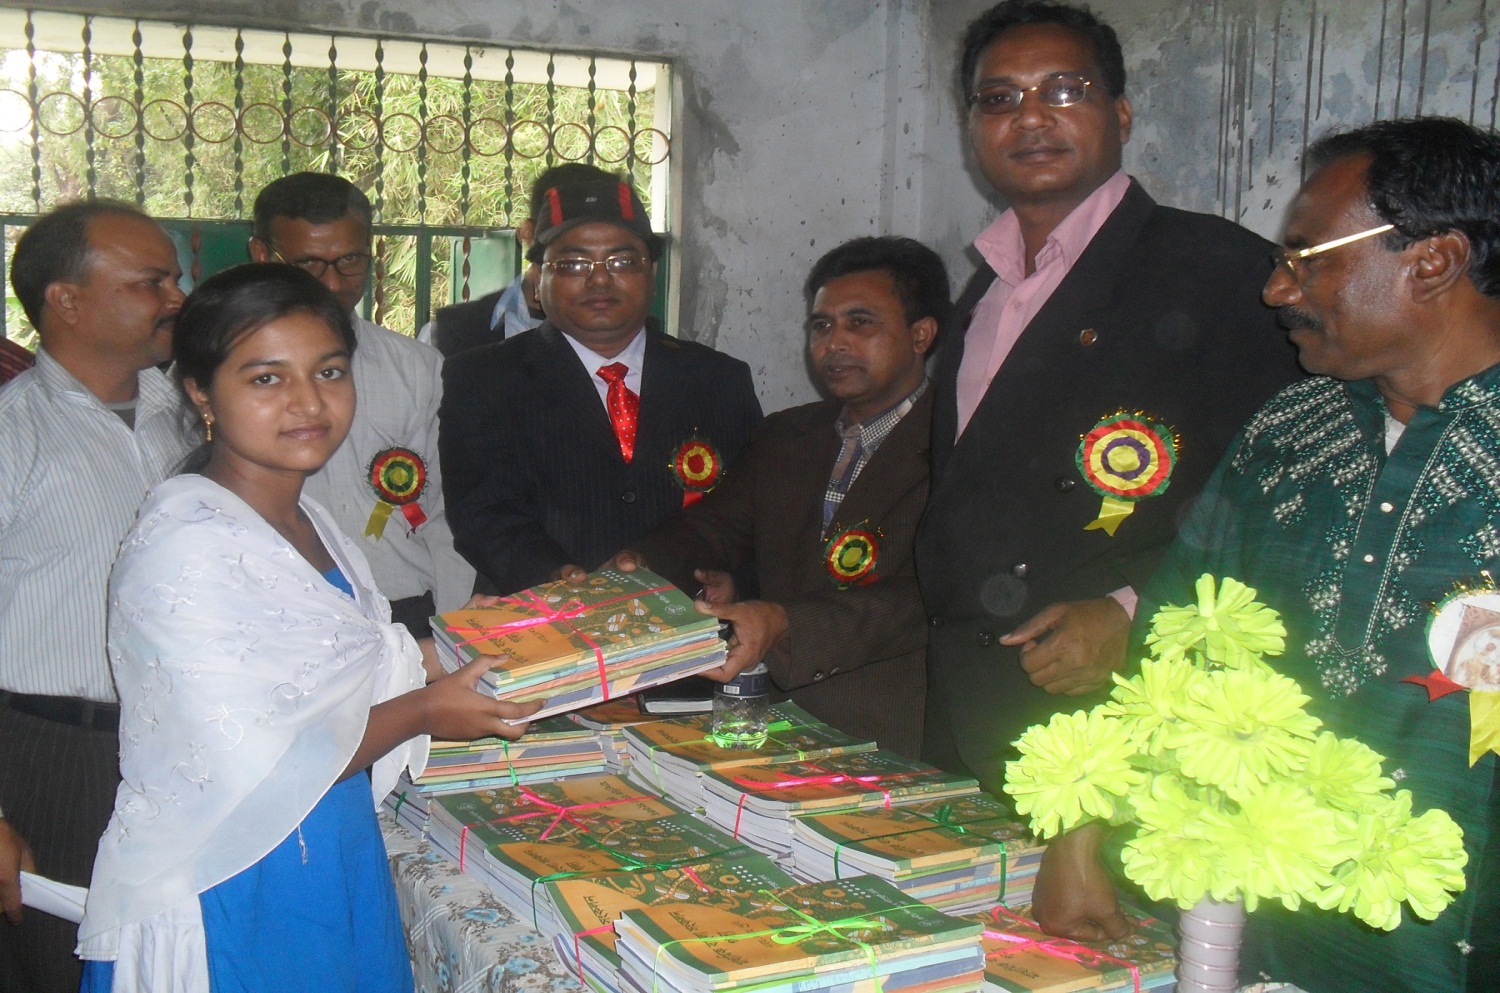 On the occasion of New Year, Begumganj-Sonaimuri Shikkha O Sastha Unnayan Foundation Chairman Md. Gias Uddin Mithu is handing out books among the students of different educational institutions.